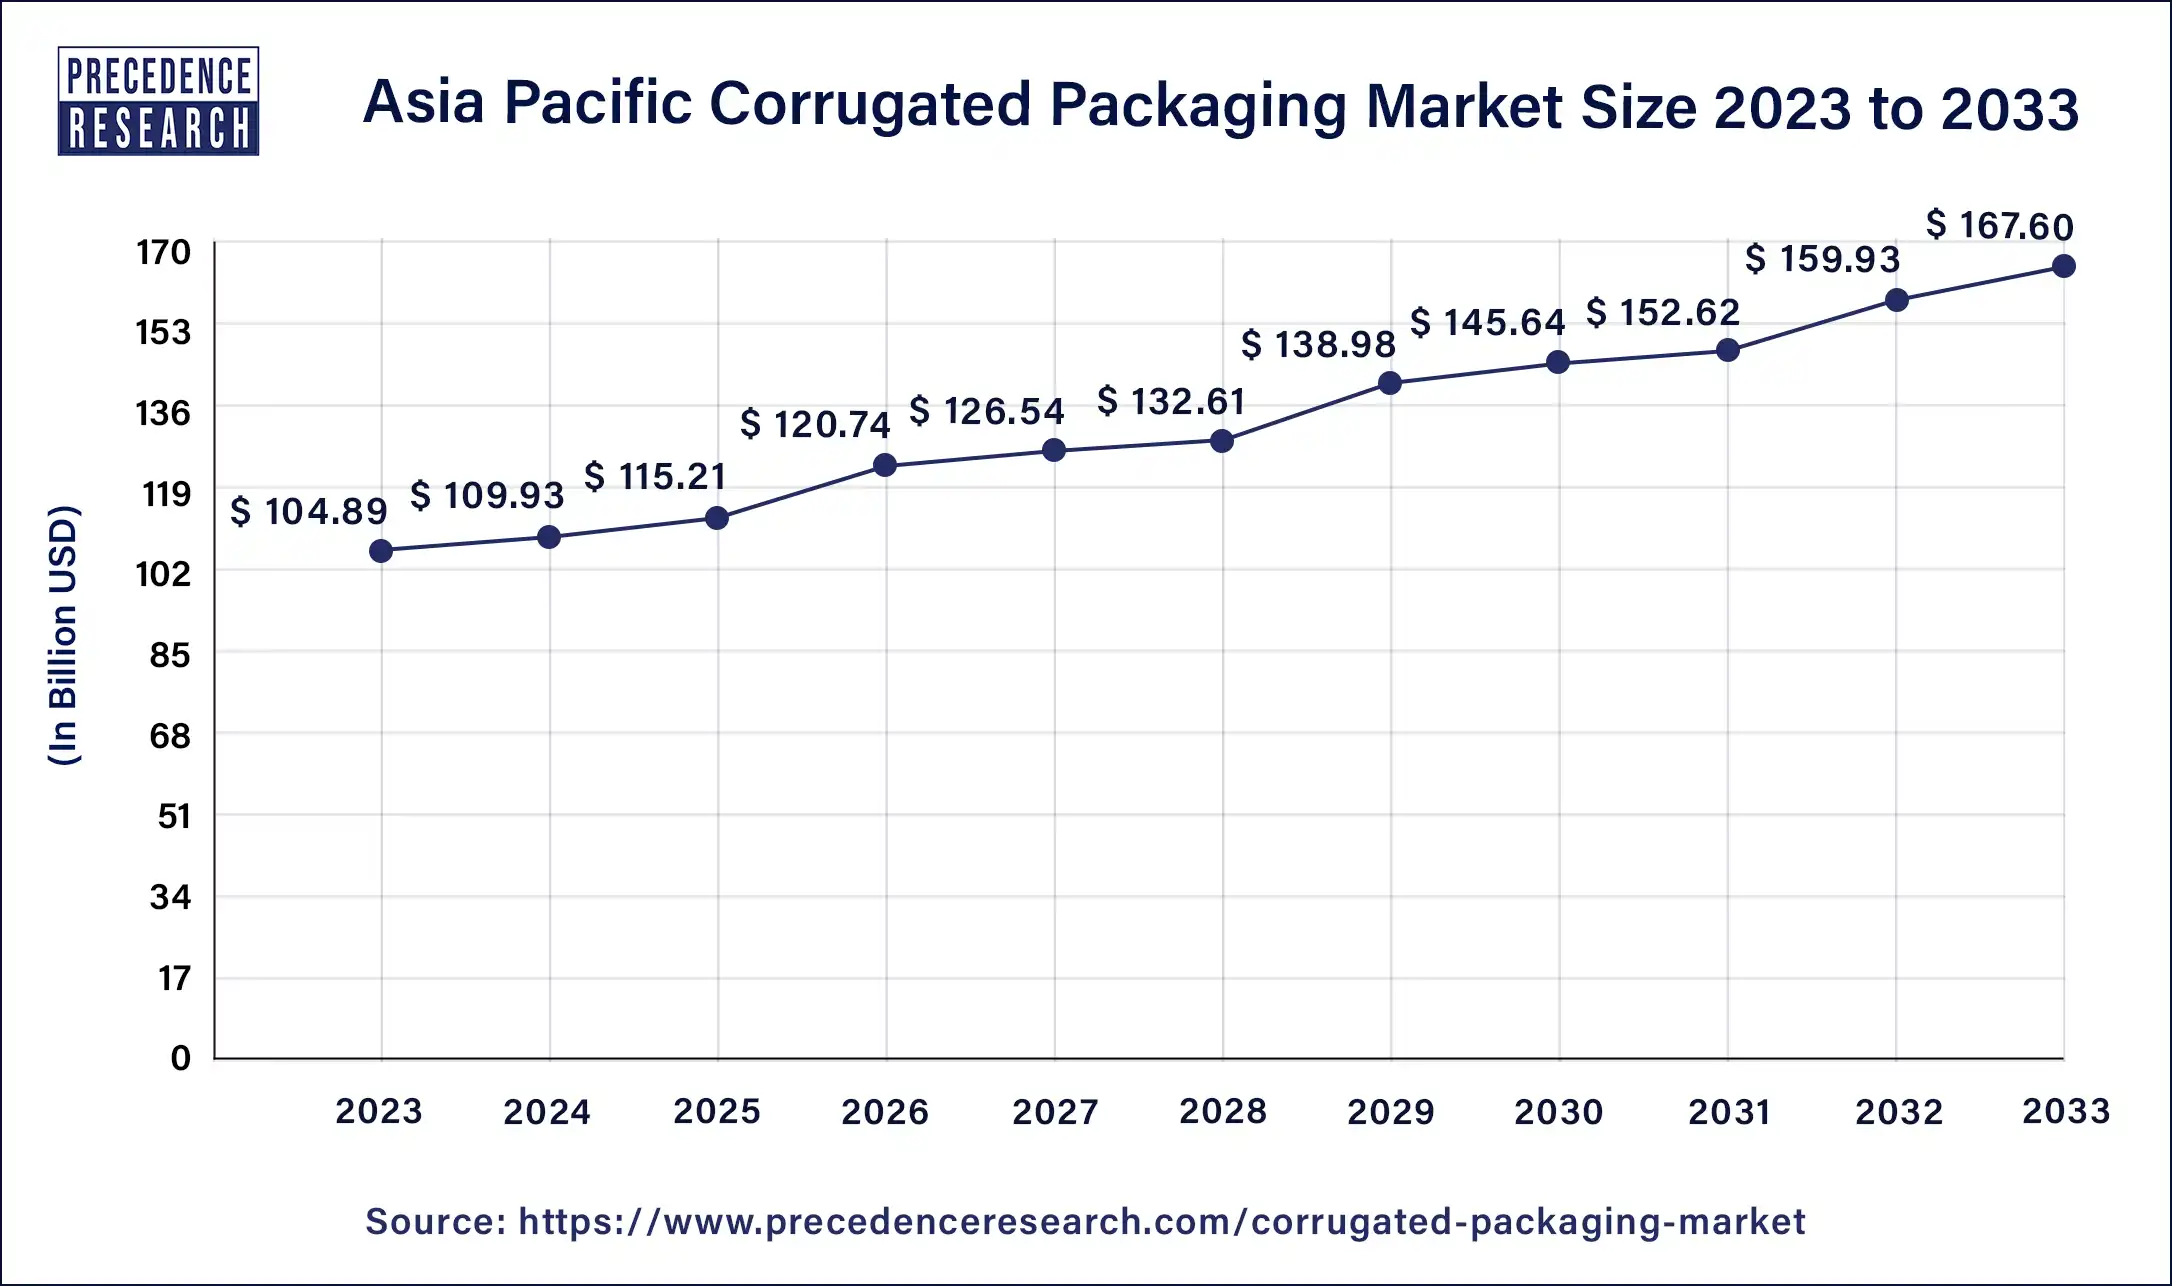 Asia Pacific Corrugated Packaging Market Size 2024 to 2033